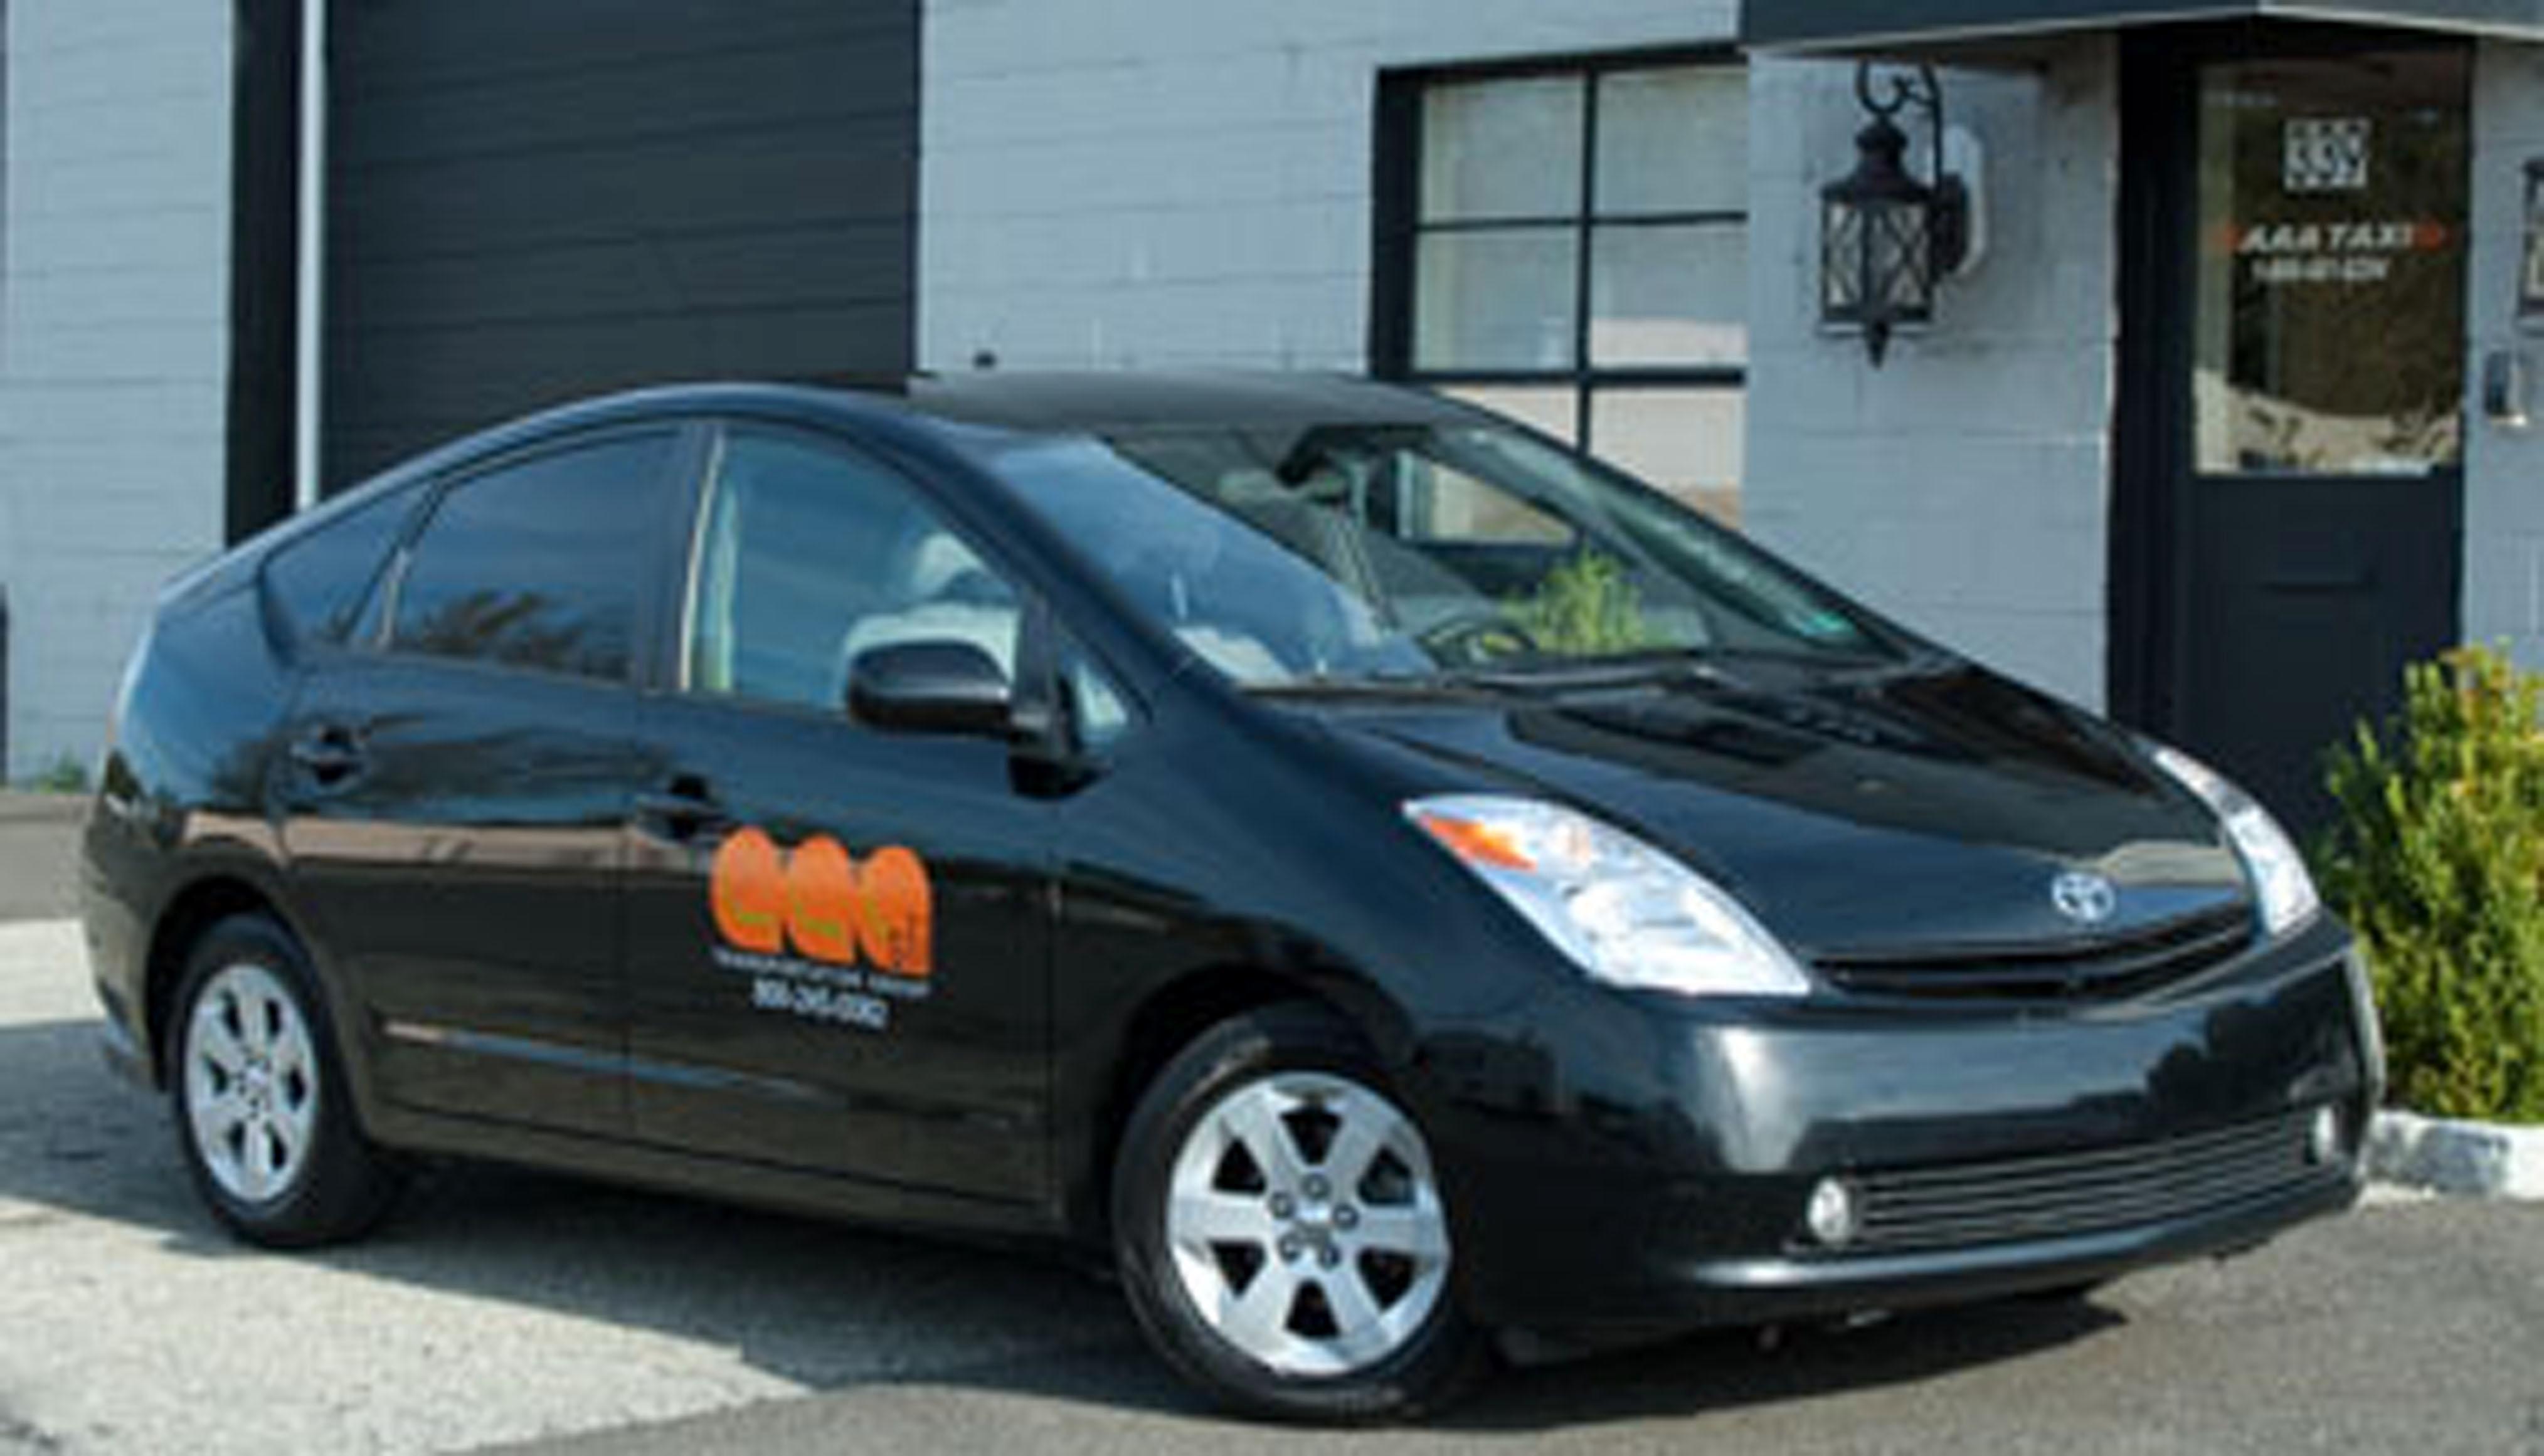 Looking for a more eco-friendly transportation option? Look no further, weï¿½ve also got hybrid vehicles operated by our taxi company, AAA Taxi. We make it easy 